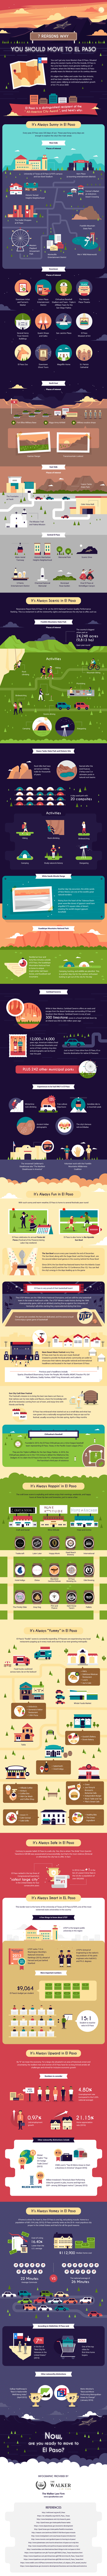 Seven reasons why someone may want to move to El Paso, Texas. The post provides an infographic on attractions of El Paso.  #ElPaso #ElPasoTx #ElPasoAttractions